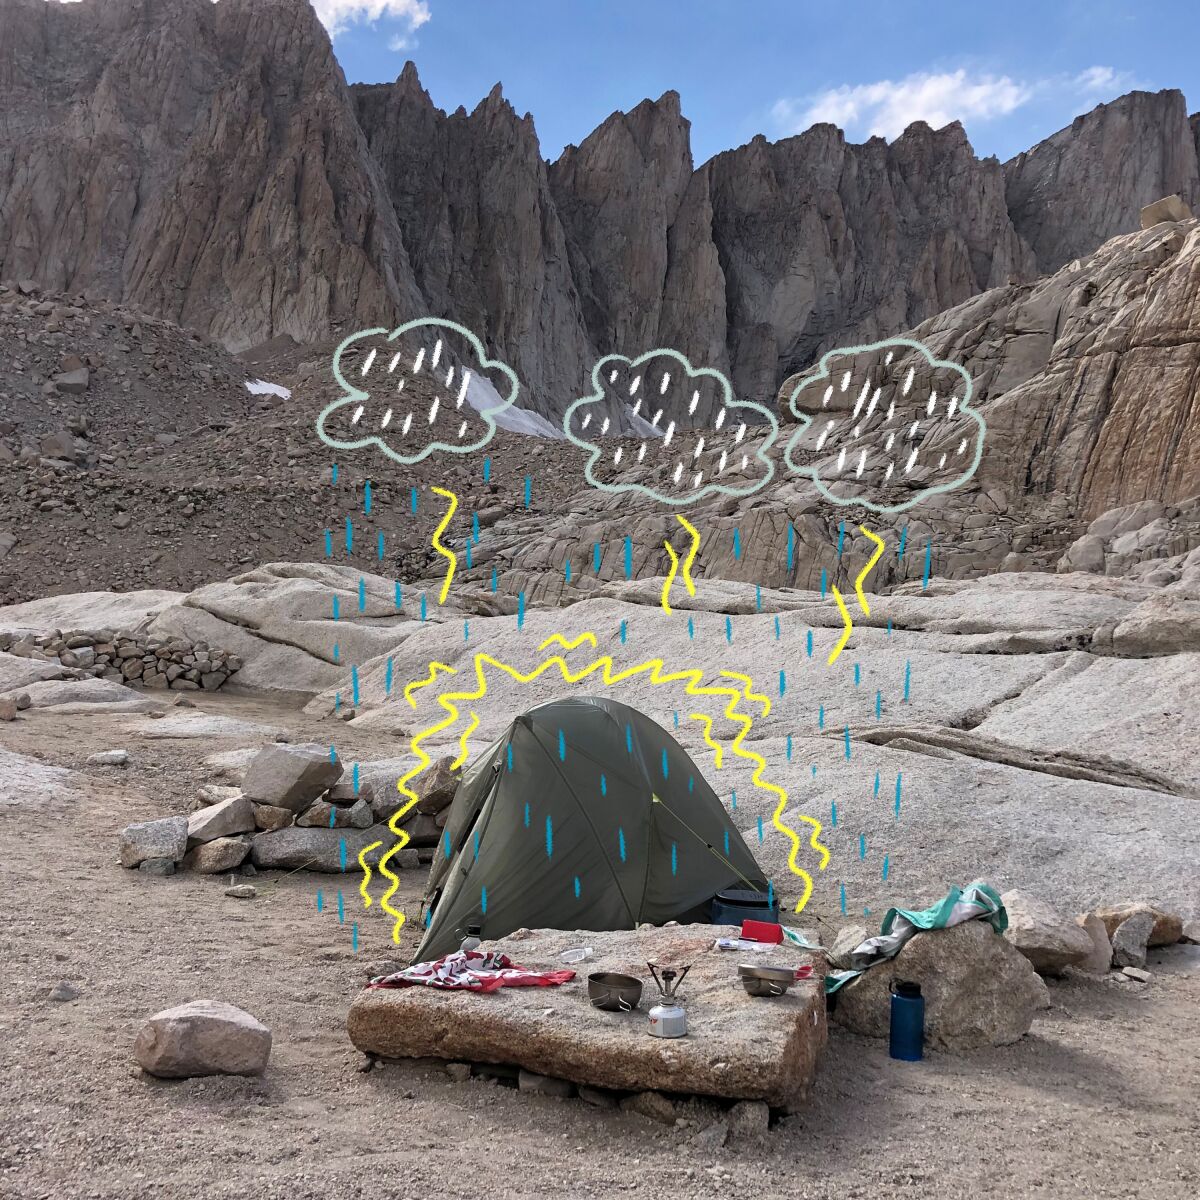 Camping at 12,000 feet on Mount Whitney.